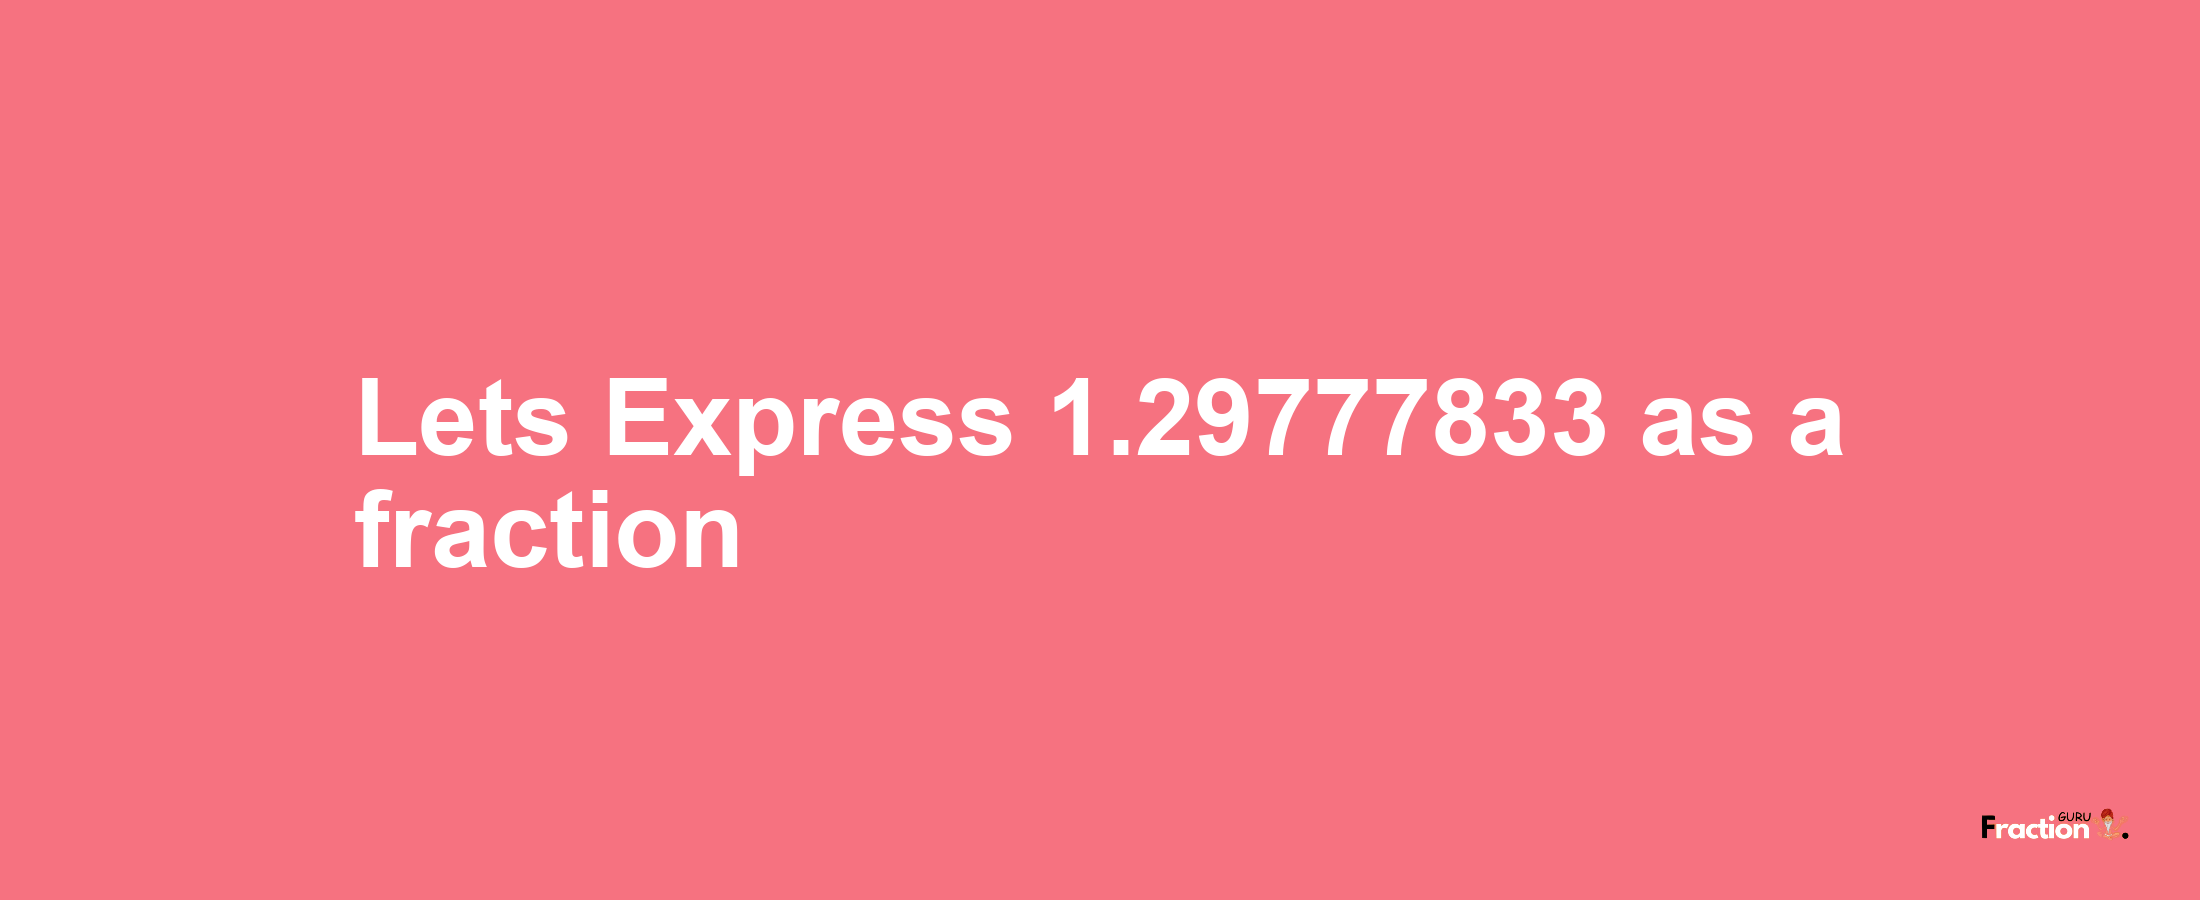 Lets Express 1.29777833 as afraction